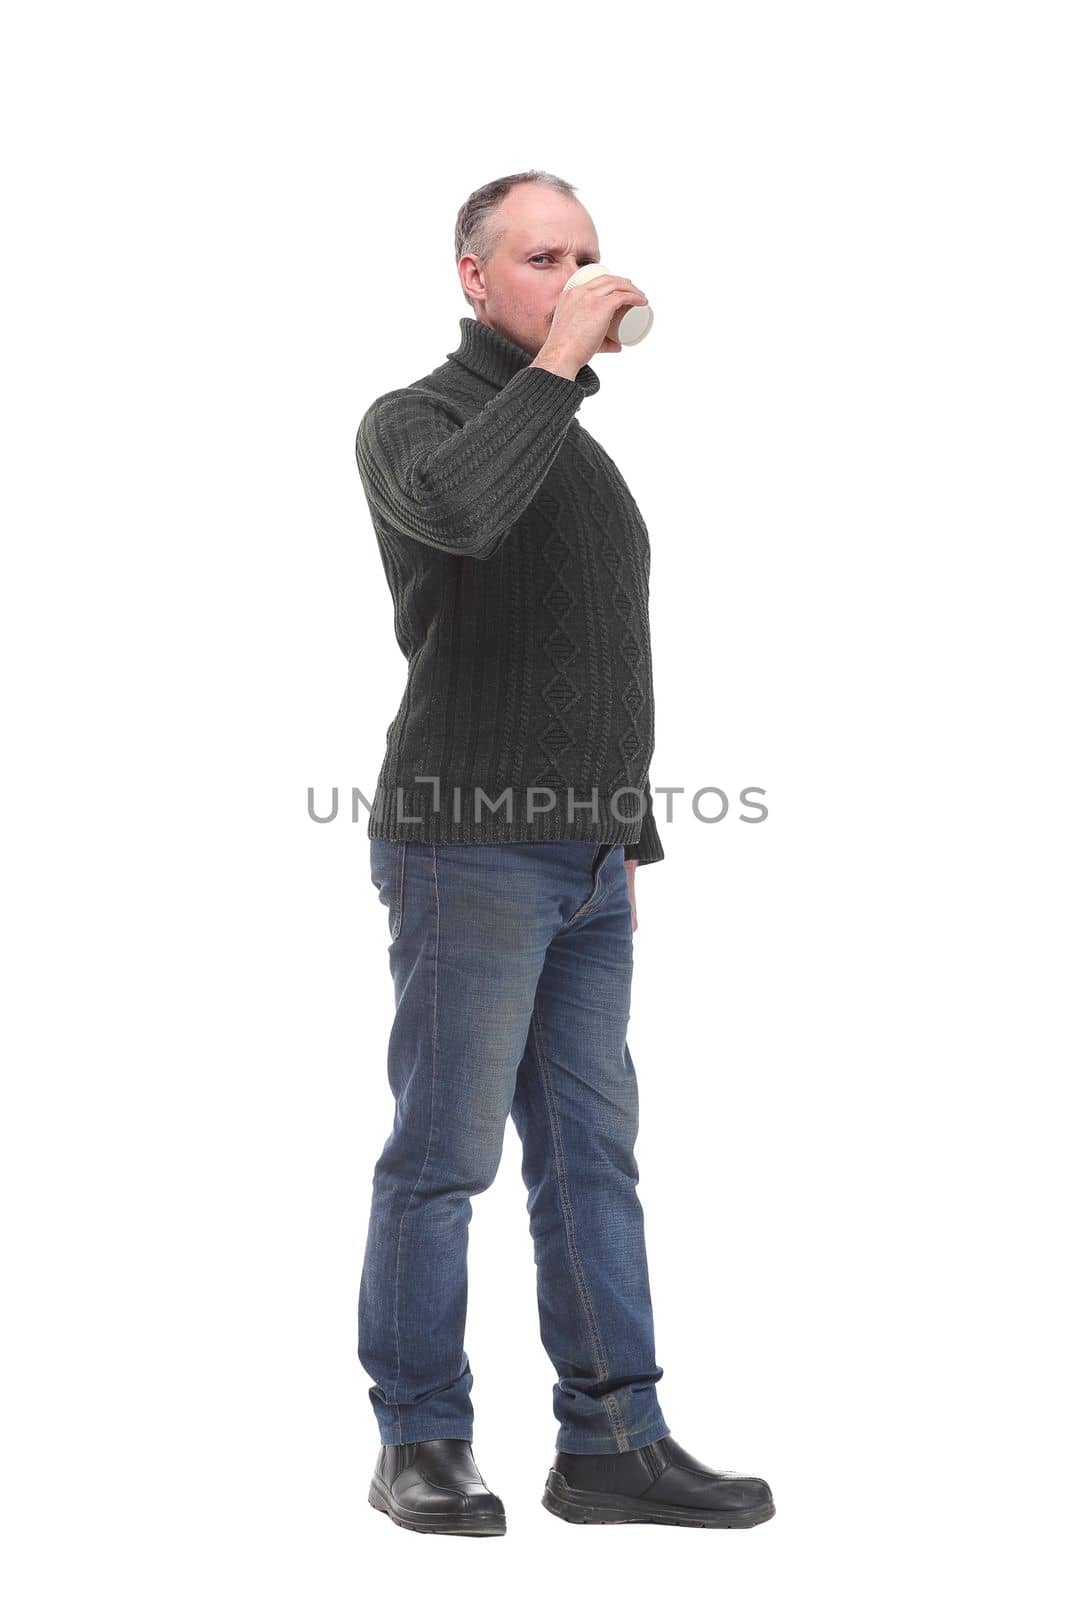 Man drinking a coffee or tea isolated on white background. Concept of break time